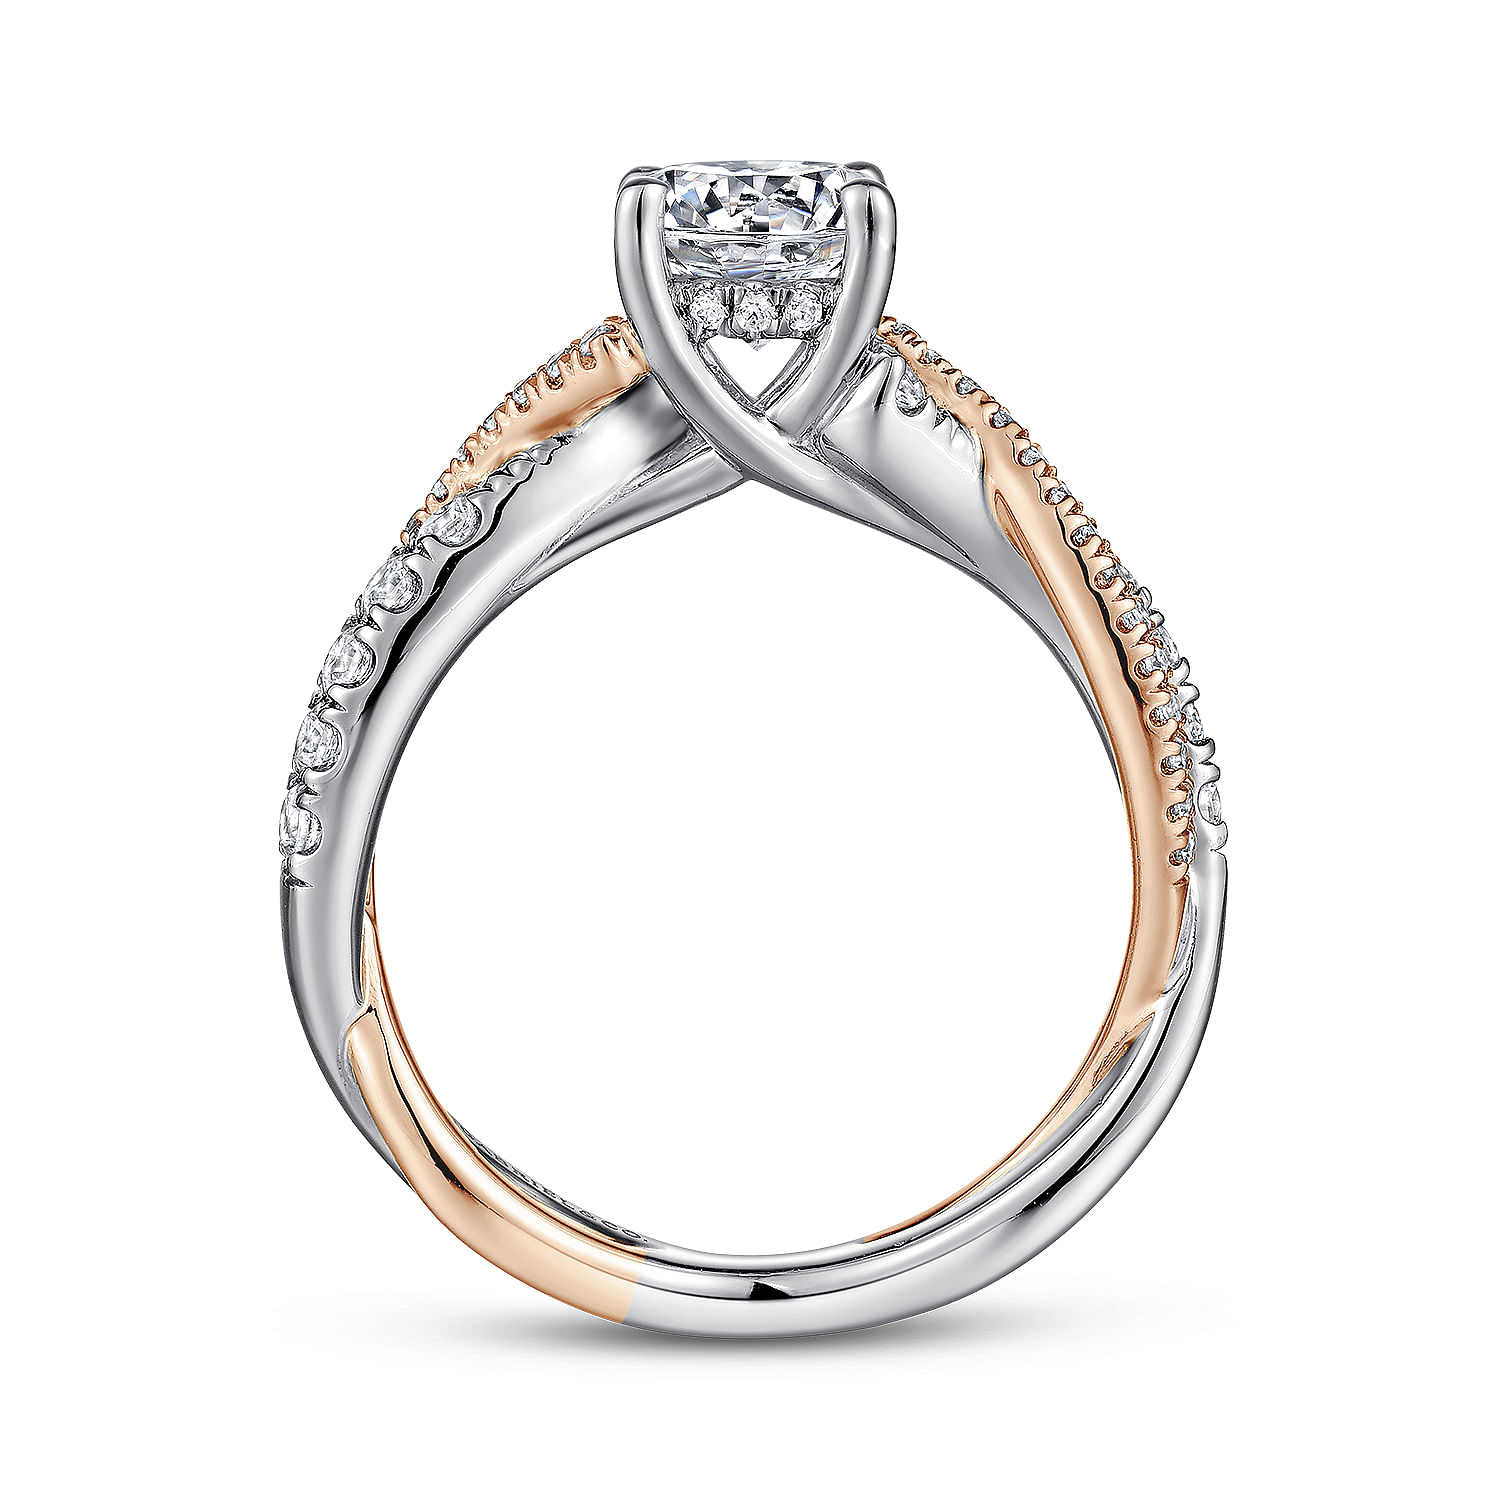 Details about   0.70 CT White Round Diamond Twisted Engagement Ring In 14K Rose Gold Finish 